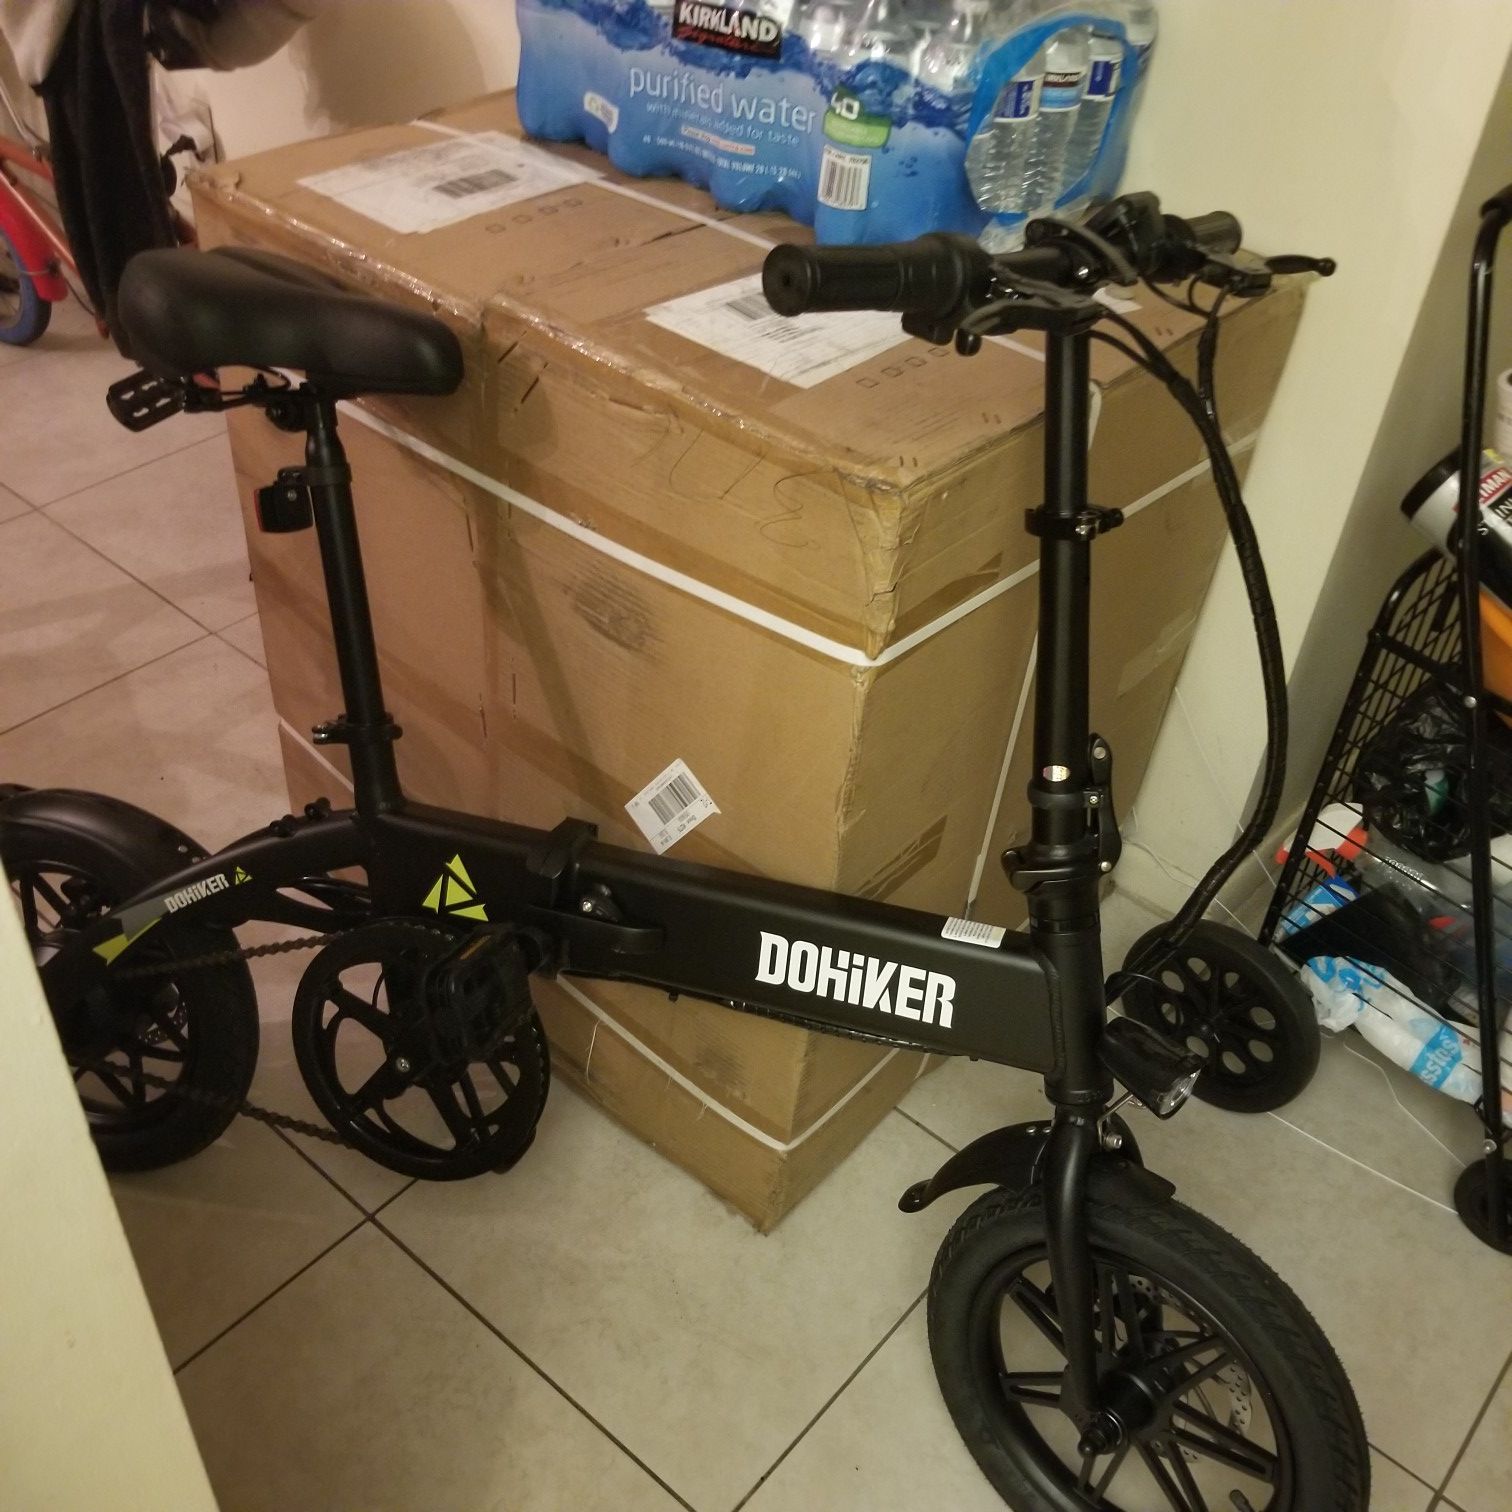 Dohiker electric bicycle,,, the best 14 inch ebike on the market for 600